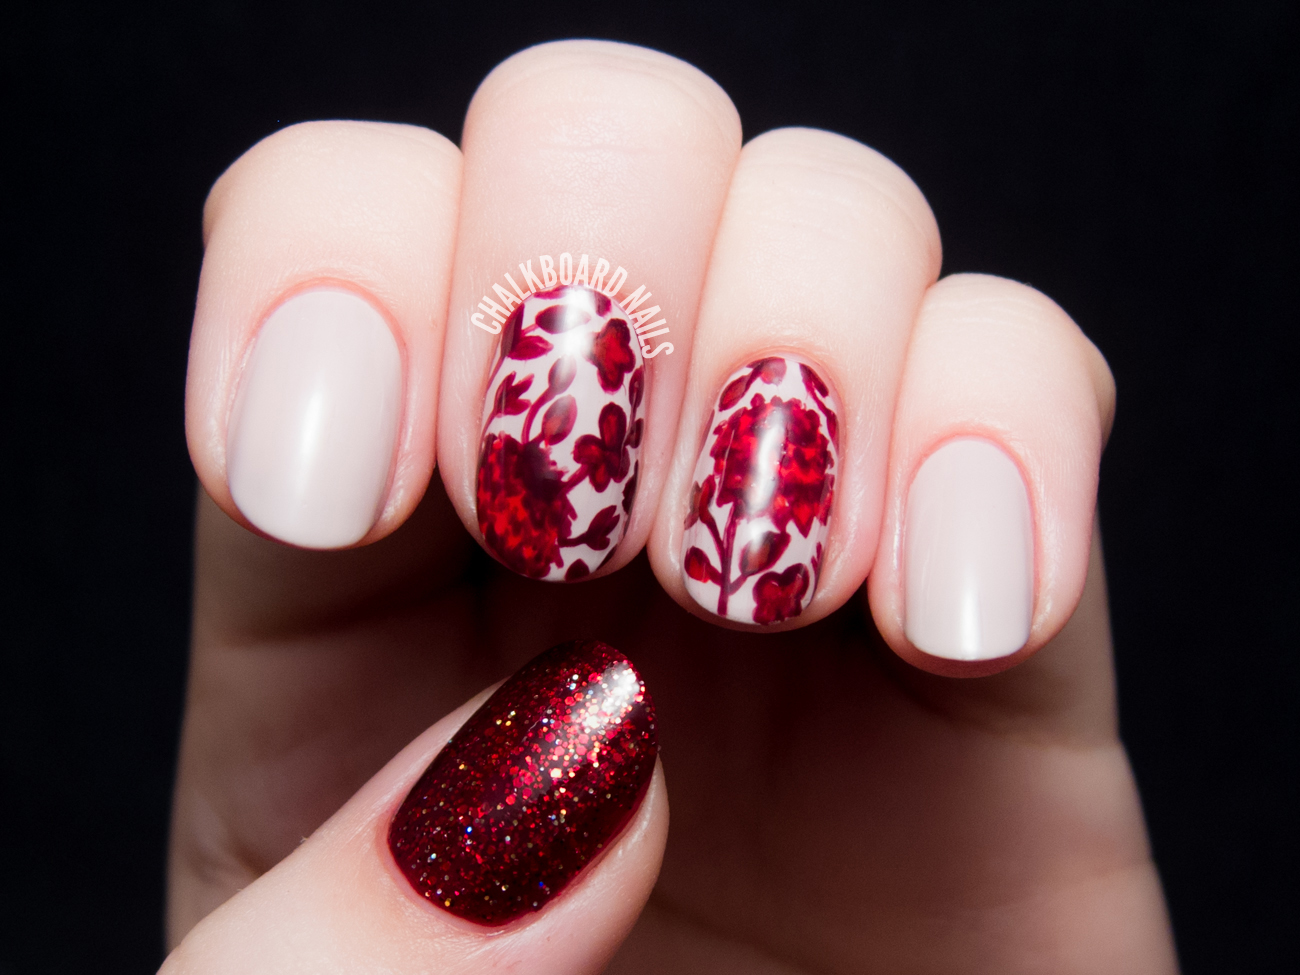 Ruby red floral print by @chalkboardnails